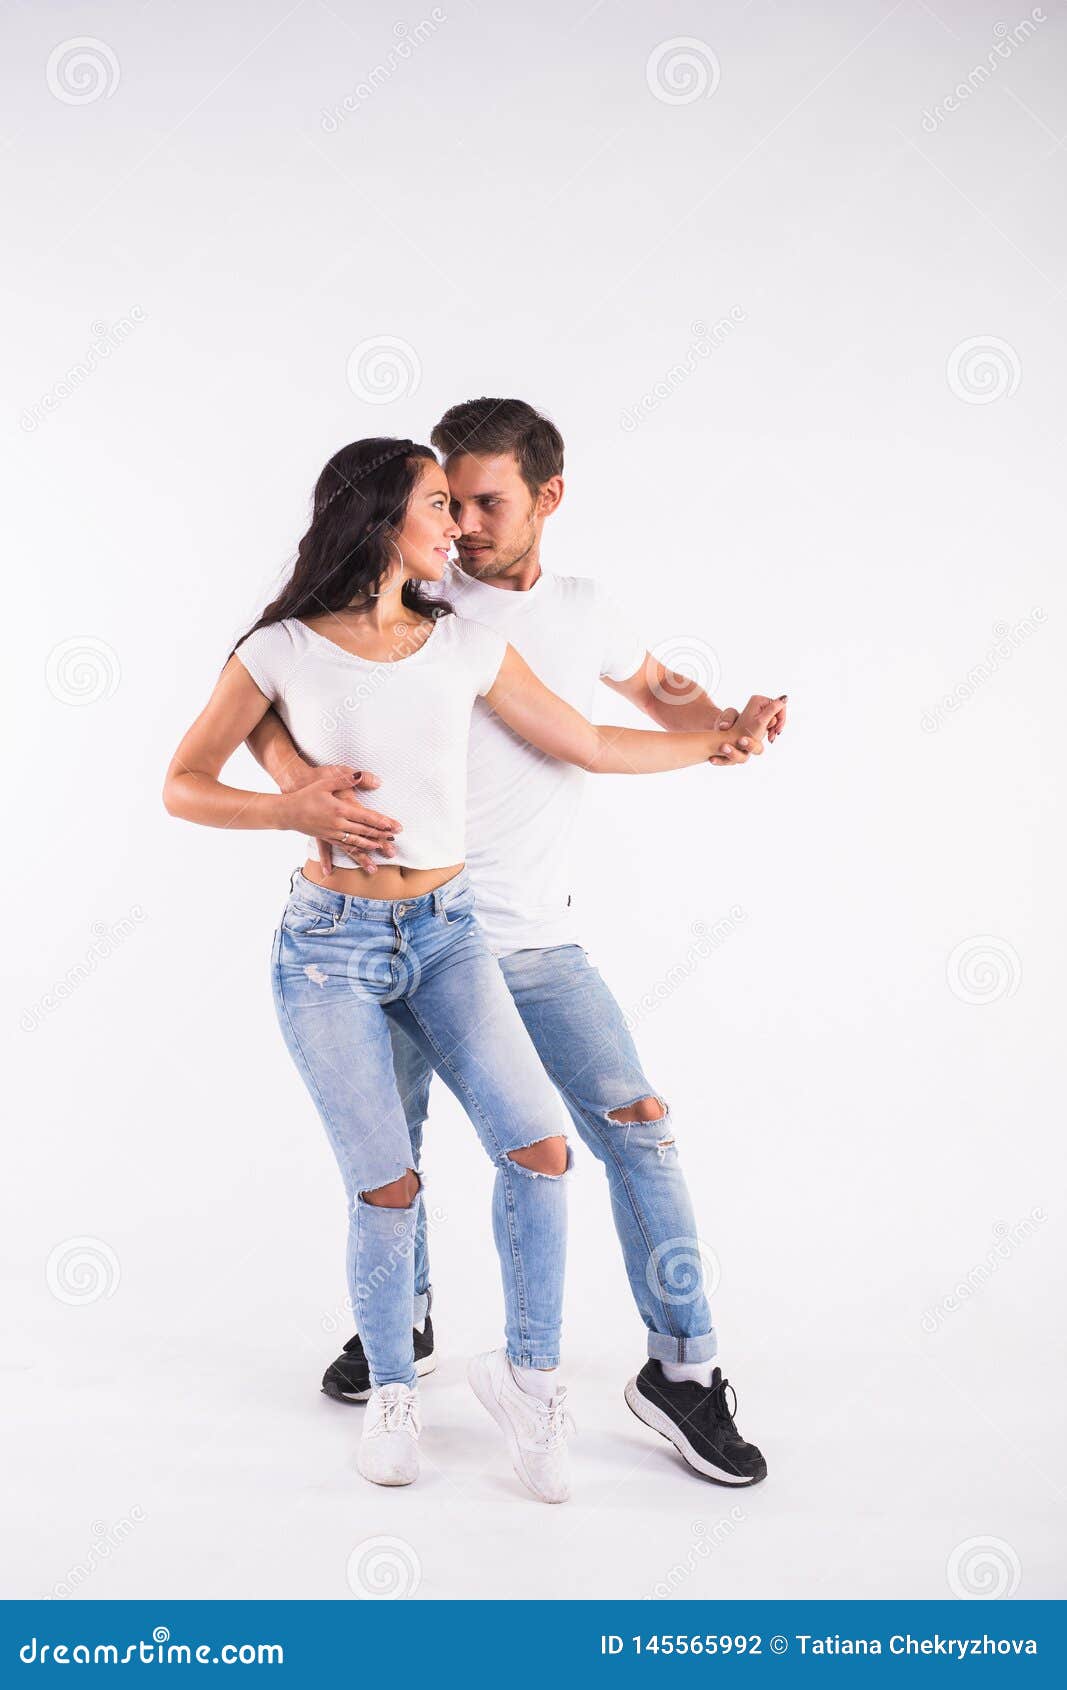 young couple dancing social latin dance bachata, merengue, salsa. two elegance pose on white background